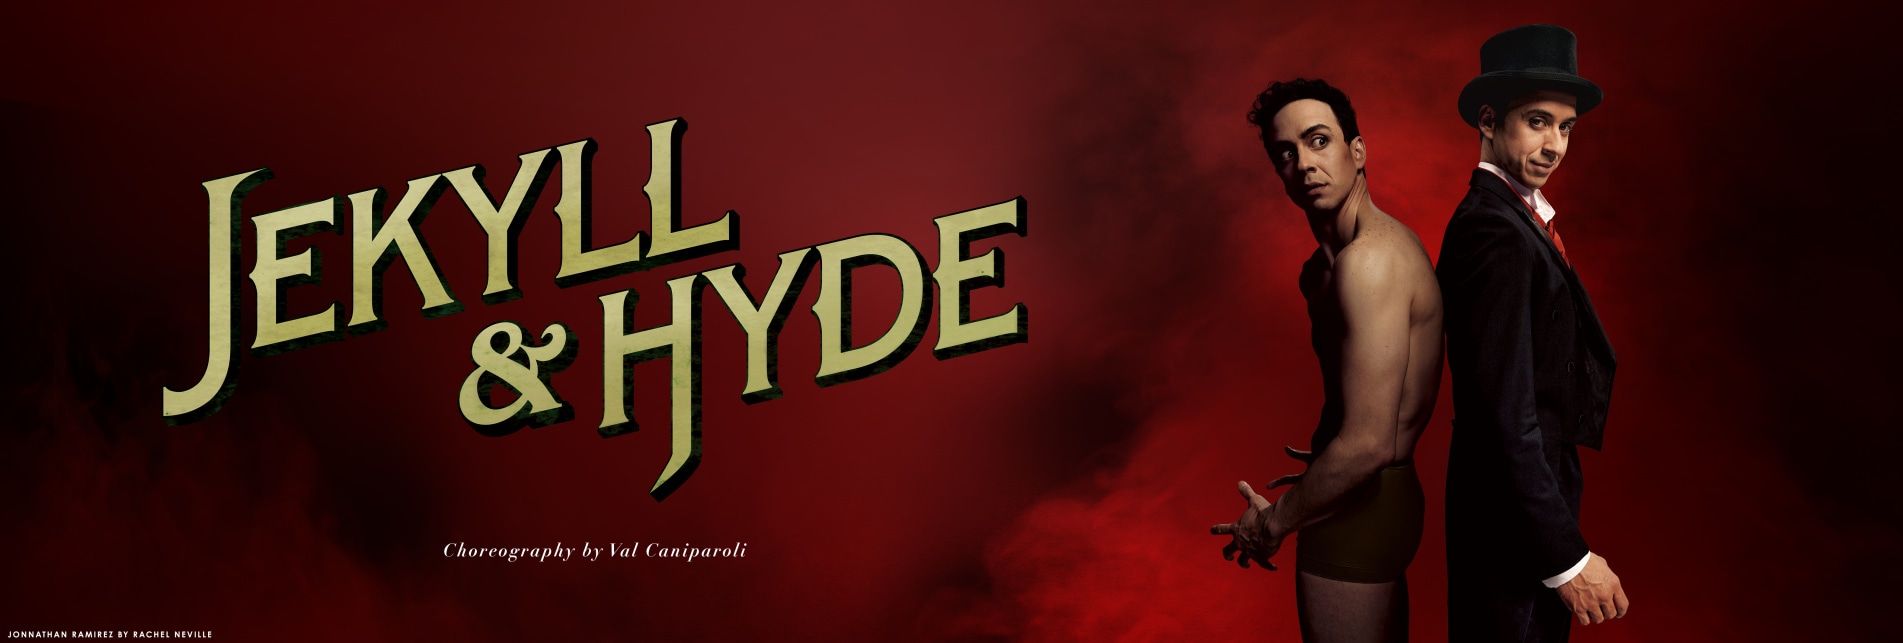 jekyll and hyde